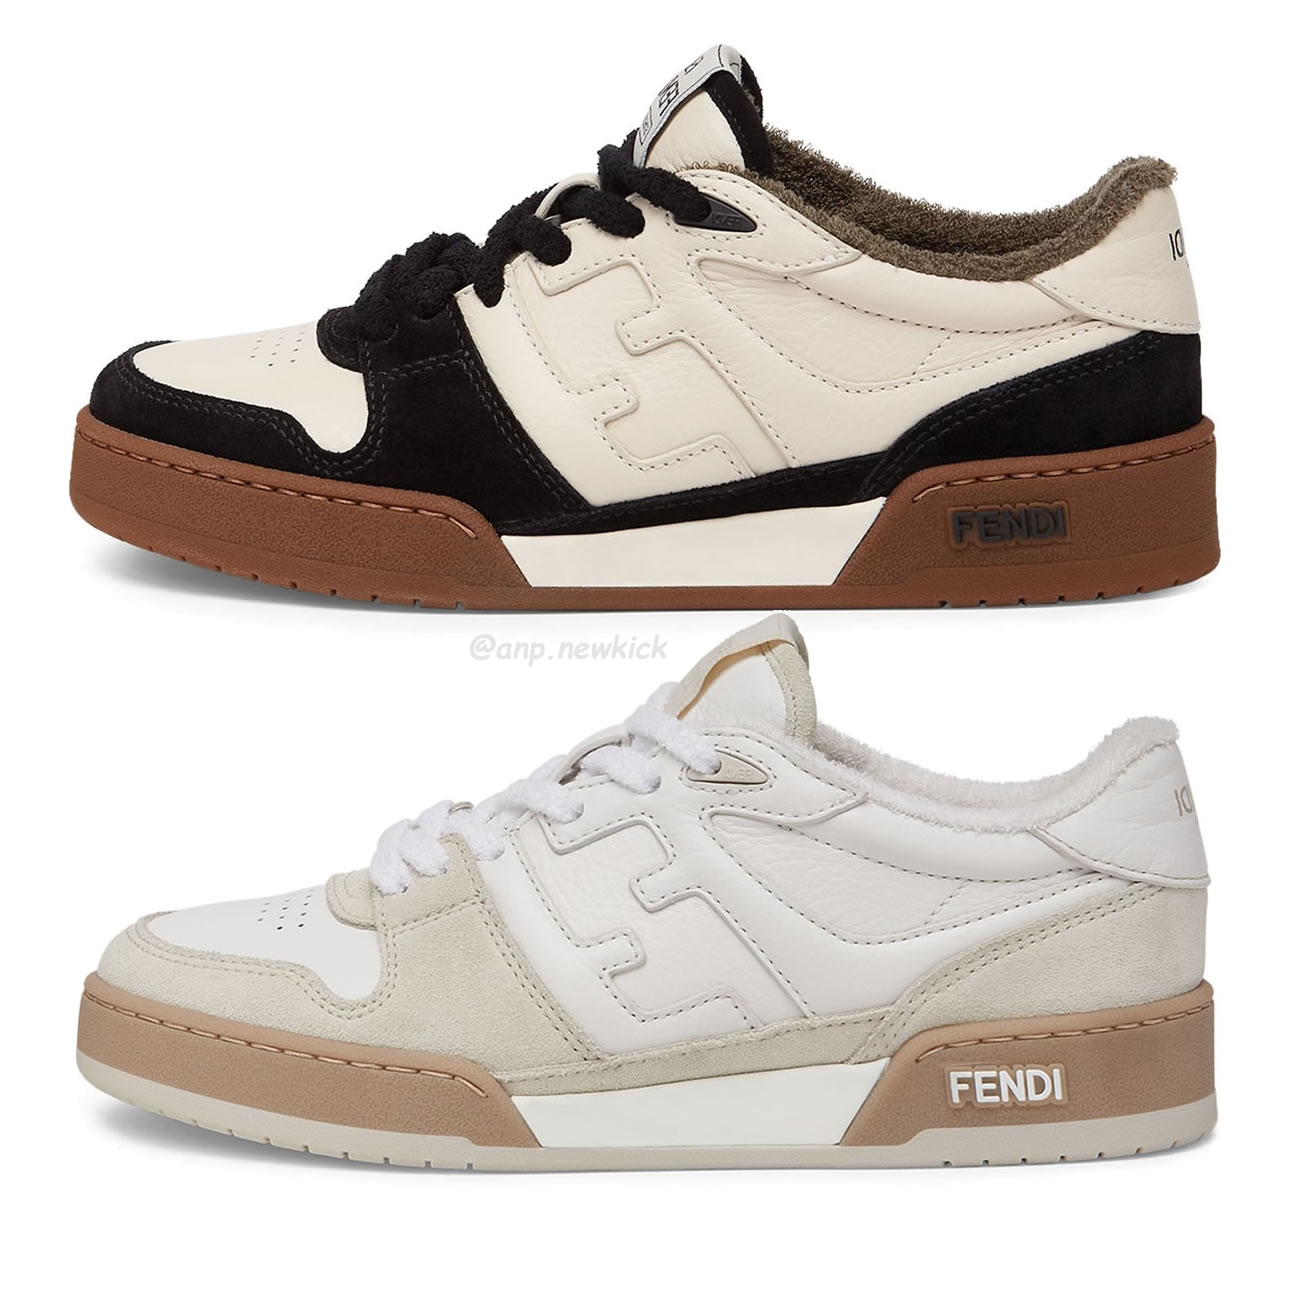 Fendi Match Cream Black White Suede And Leather Low Top Sneakers (1) - newkick.org